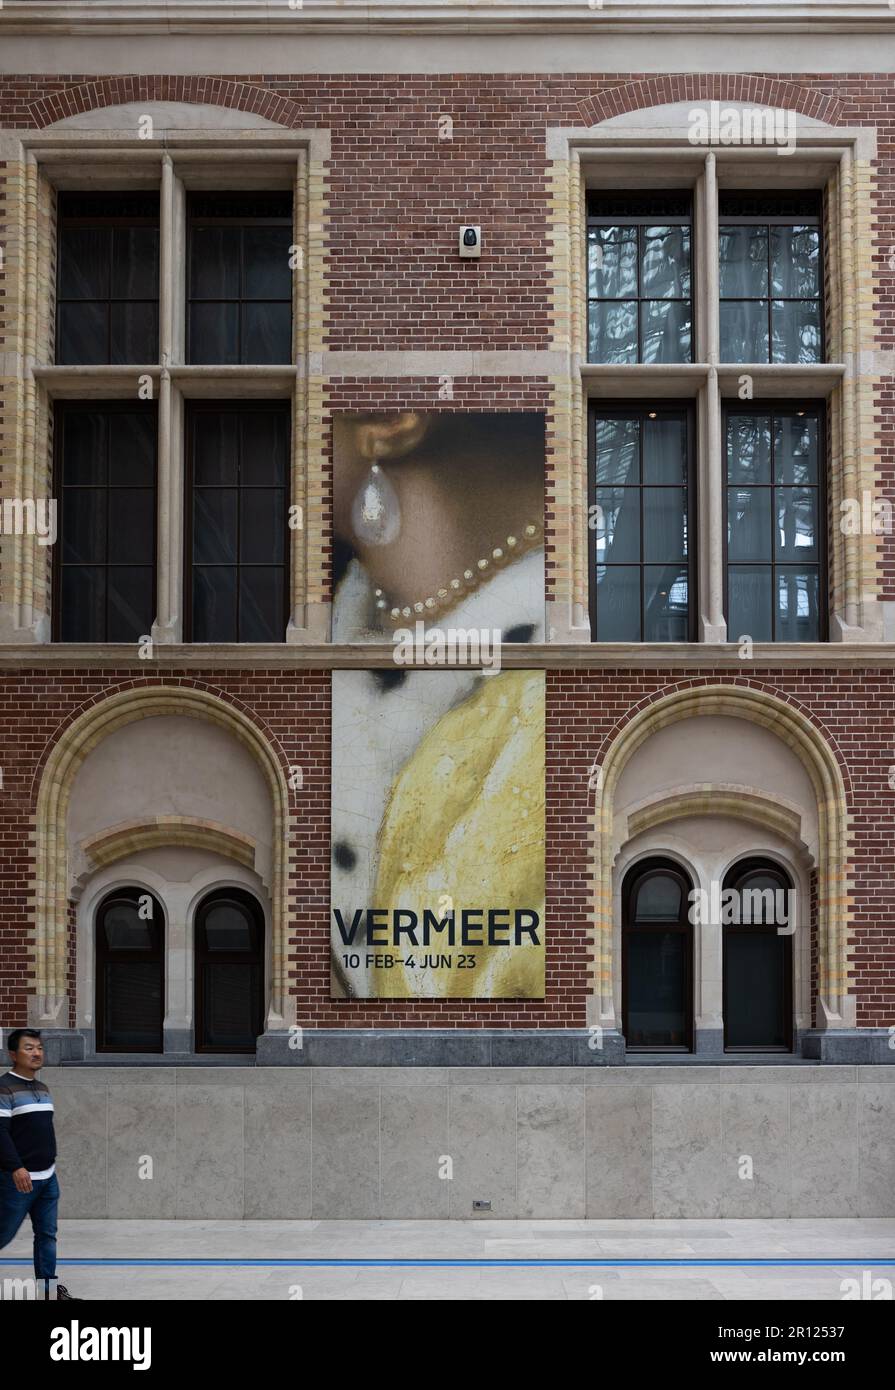 Amsterdam, Netherlands - April 21, 2023: The Rijksmuseum in Amsterdam - the largest exhibition on Dutch painter Johannes Vermeer ever - displaying 28 of his masterpieces Stock Photo